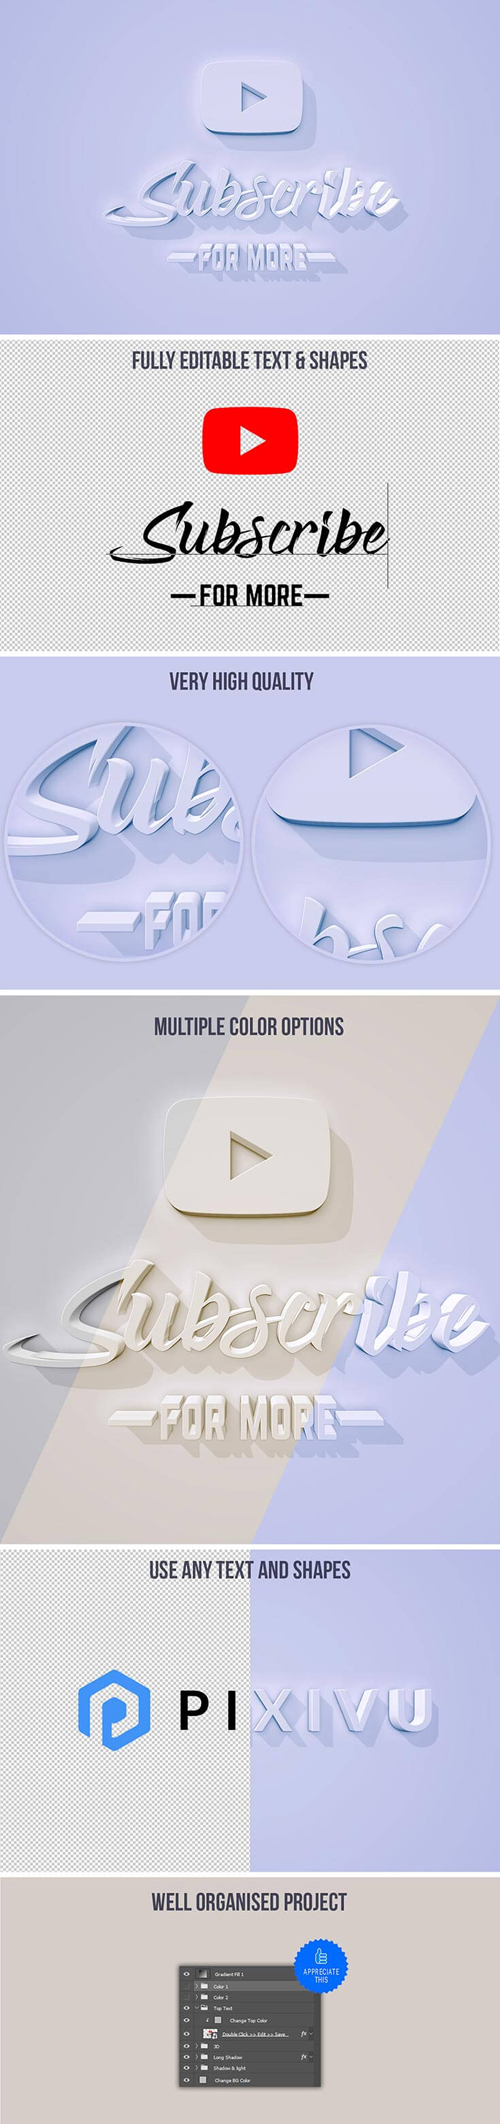 3D Text Effect in PSD